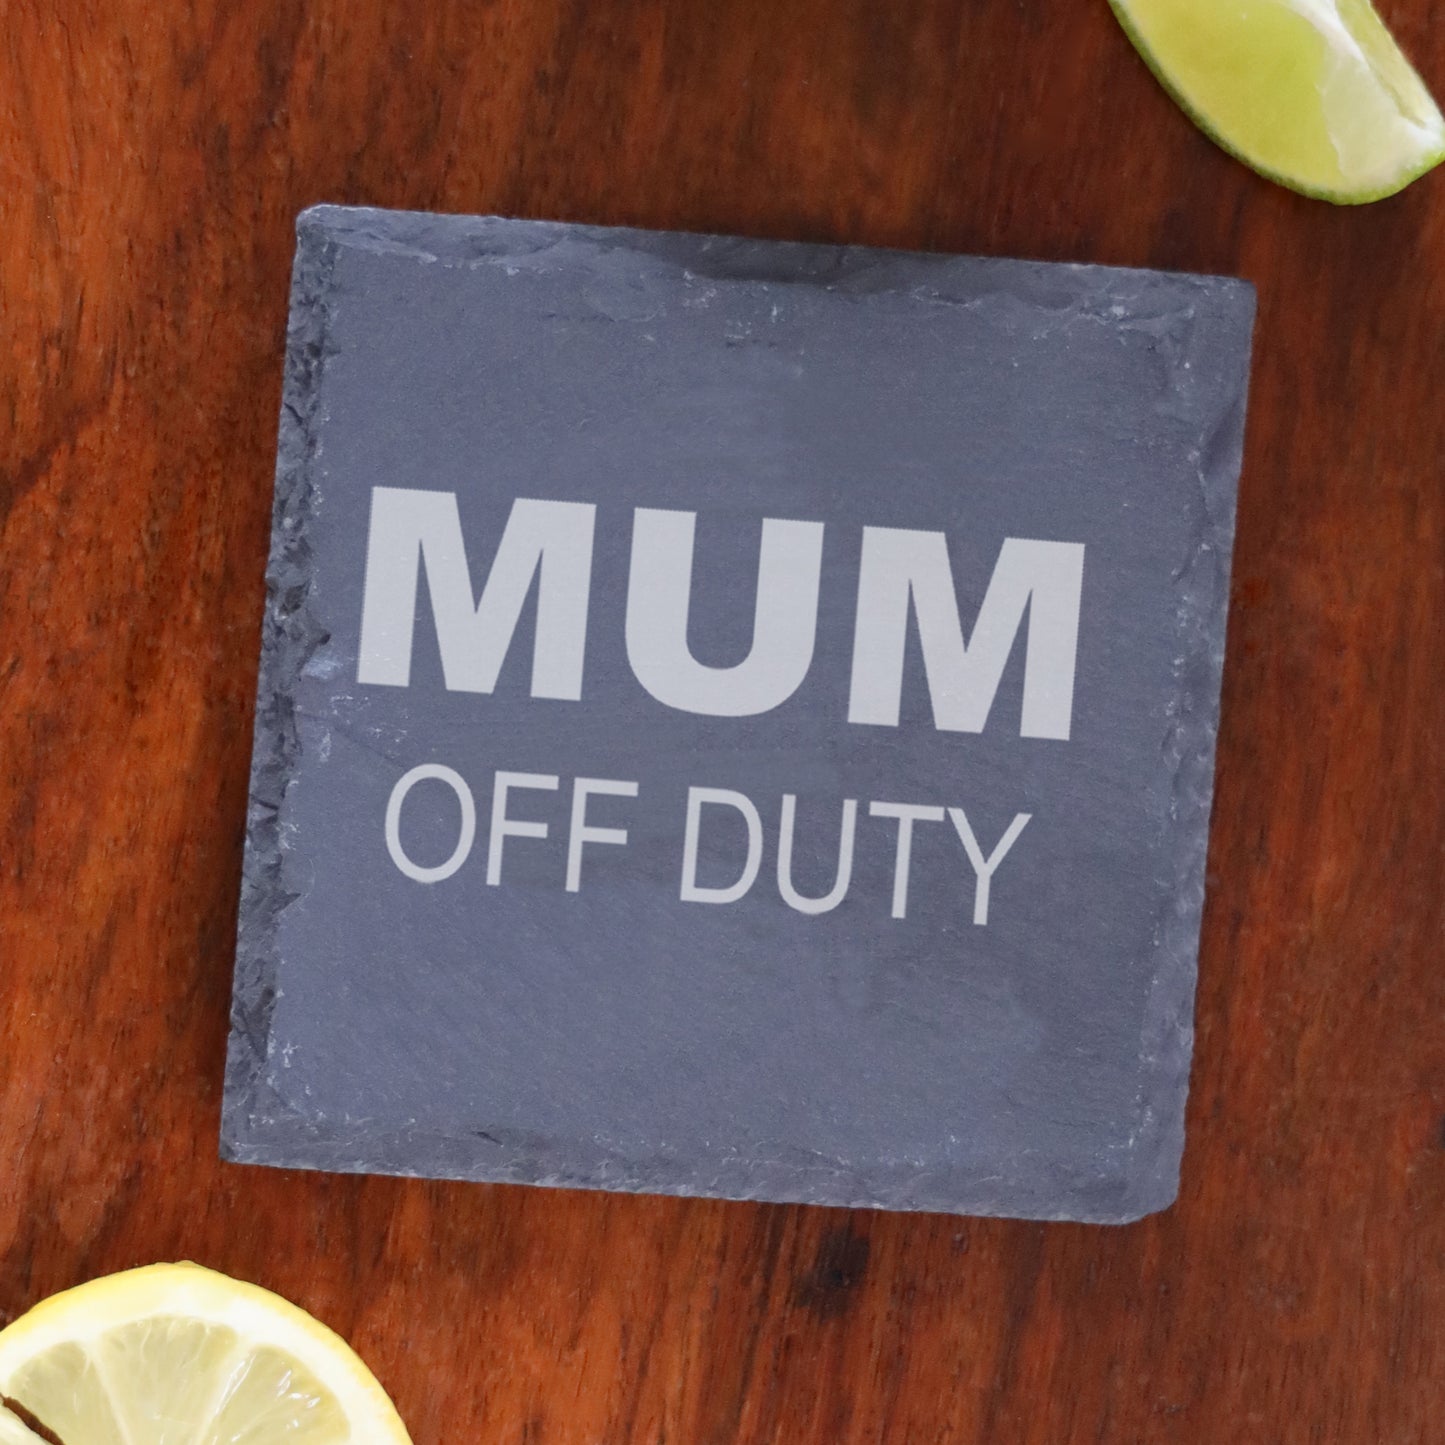 Engraved "Mum Off Duty" Novelty Wine Glass and/or Coaster Set  - Always Looking Good - Square Coaster Only  